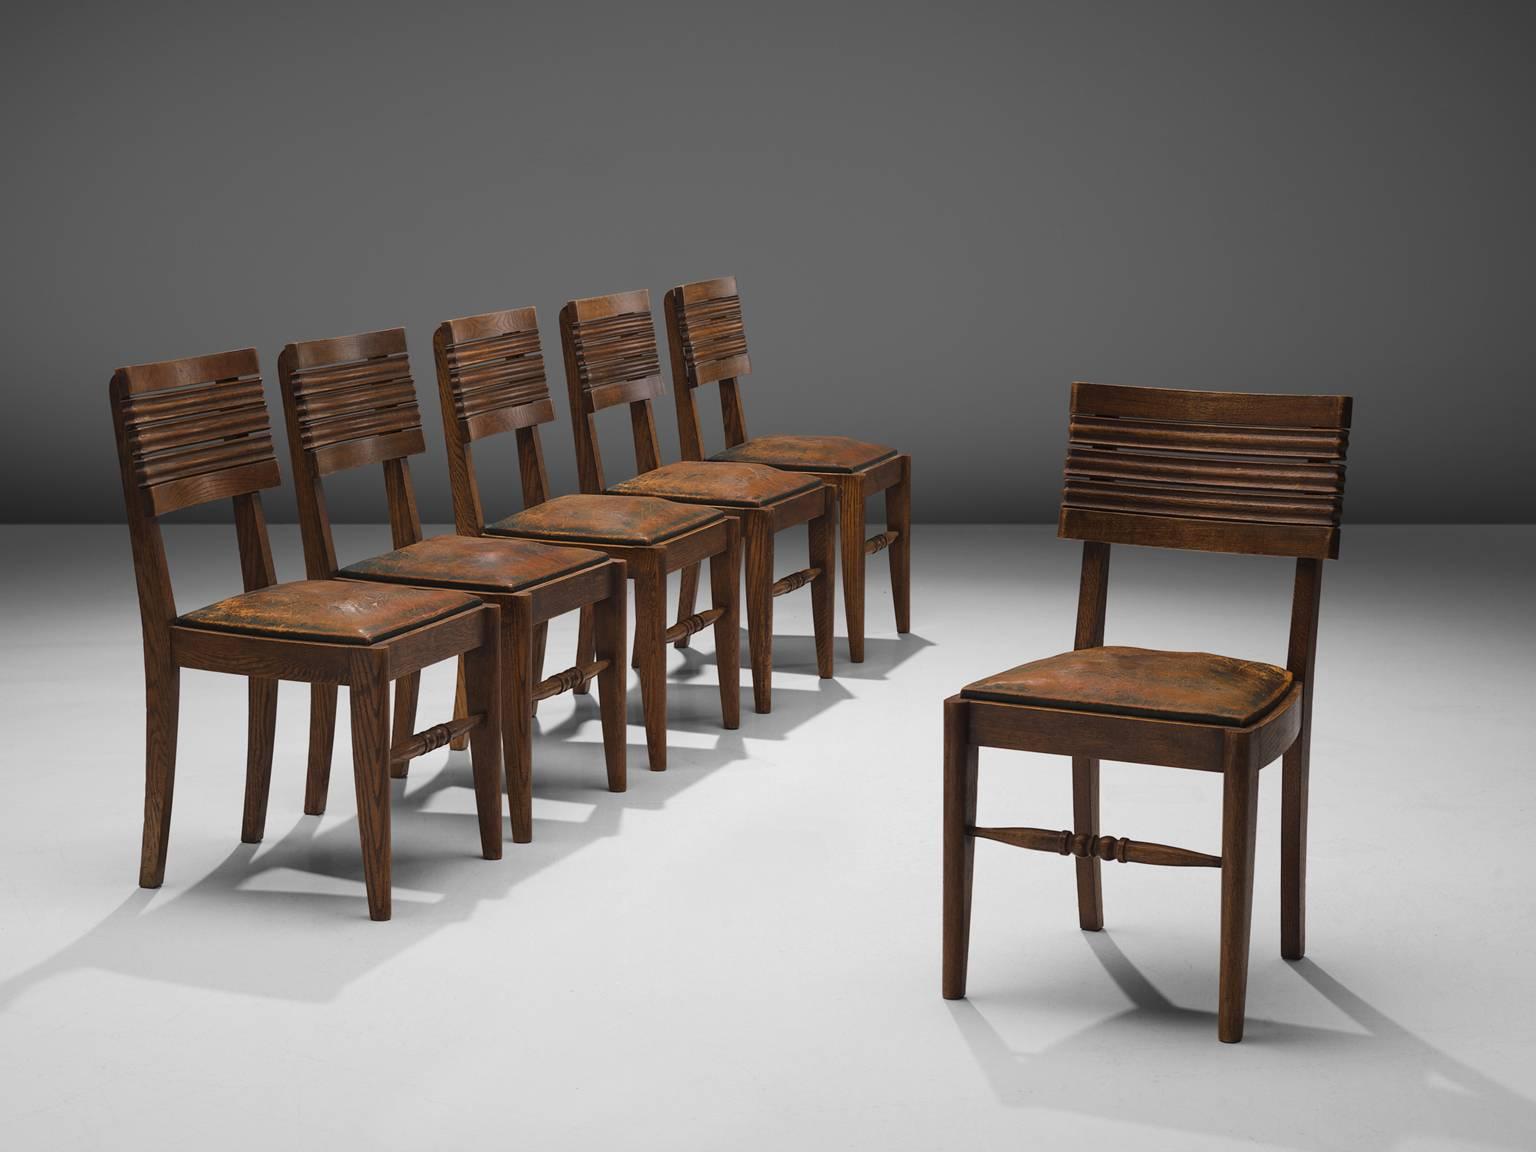 Gaston Poisson, set of six dining chairs, oak and green and brown leather, France, 1940s.

Dining chairs in solid oak, with beautiful detailed woodcarving and stunning patinated leather. The back of the chair consist of five slightly curved slats: